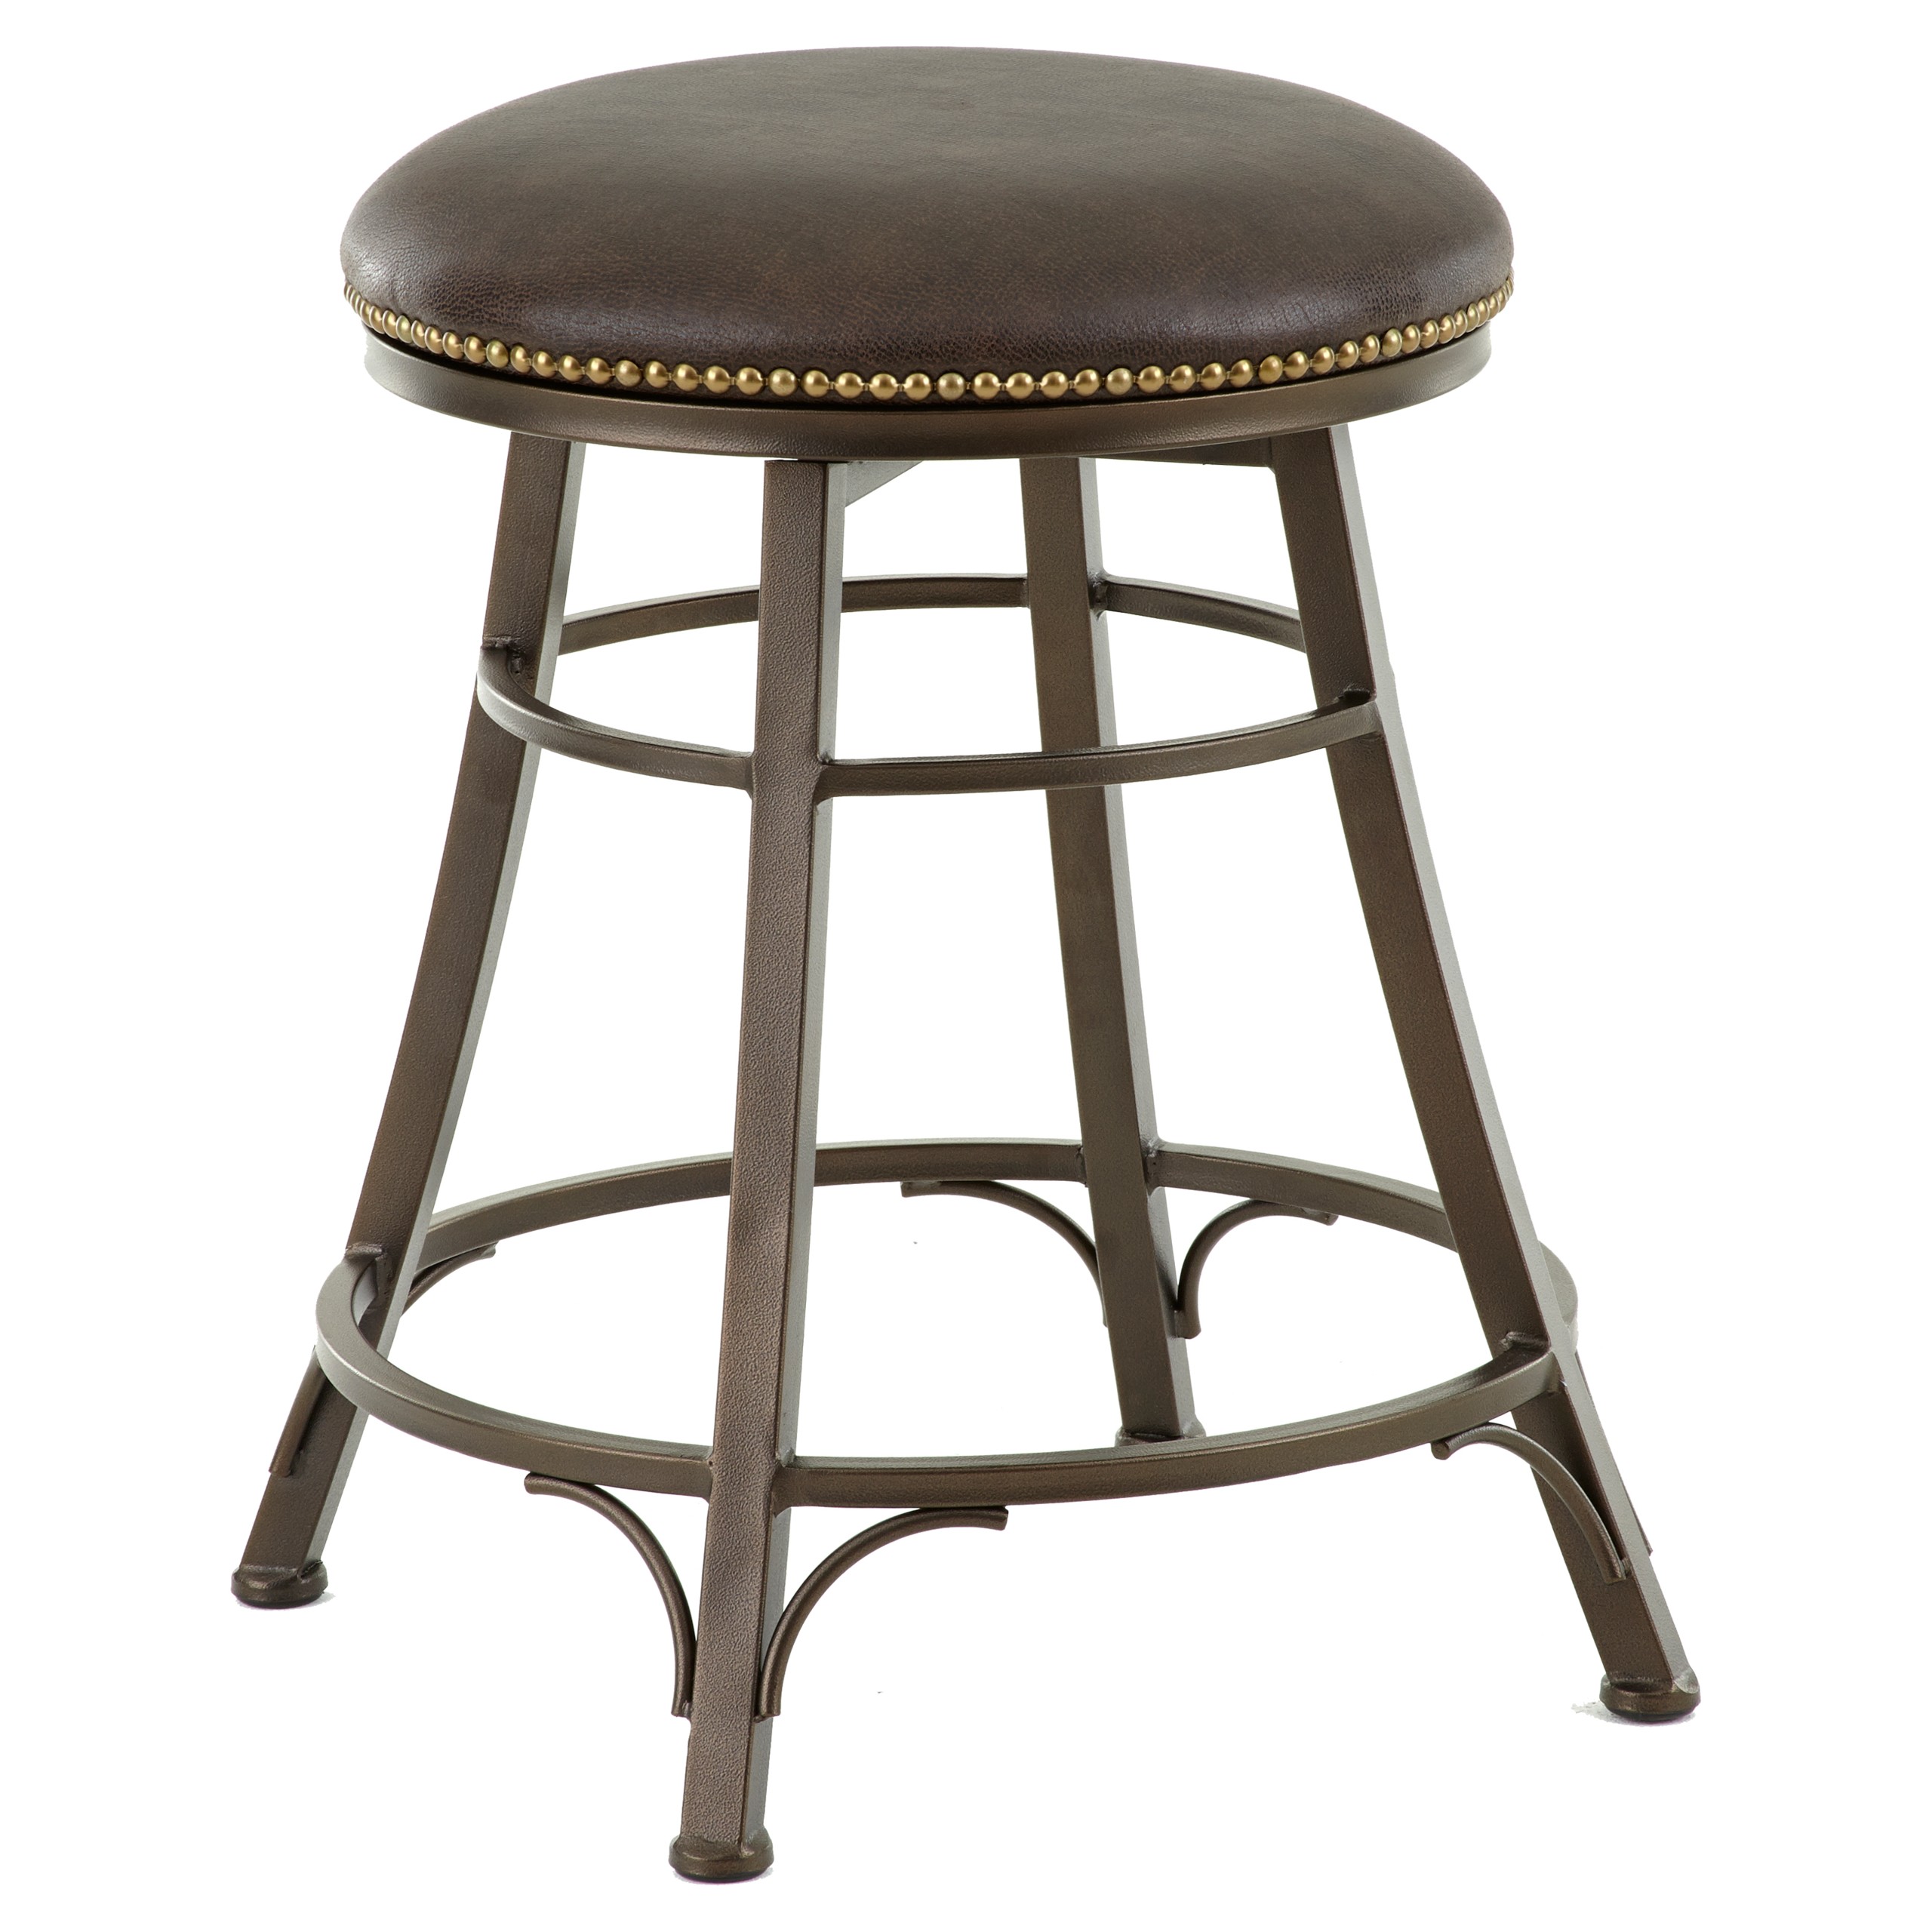 Steve Silver Bali Backless Swivel Counter Stool Traditional Bar Stools And Counter Stools